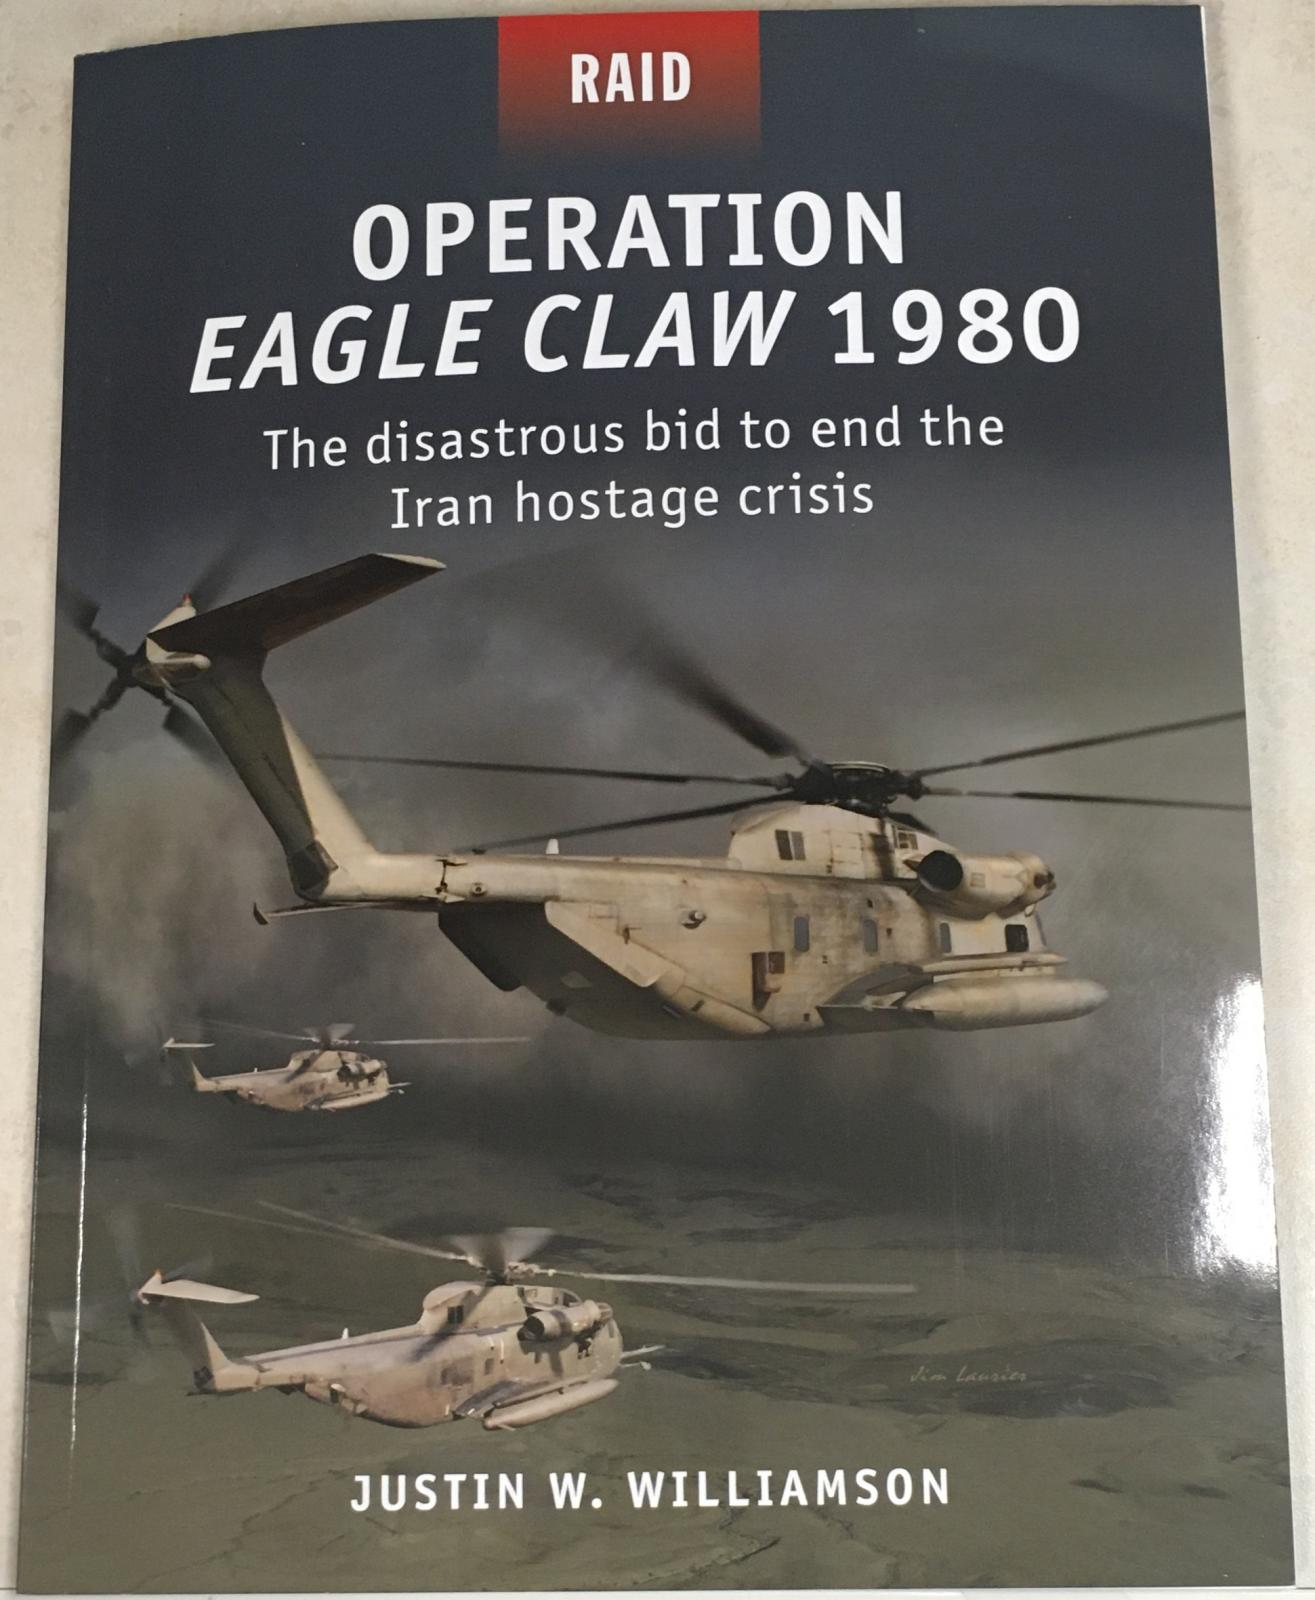 https://reviews.ipmsusa.org/sites/default/files/reviews/operation-eagle-claw/eagleclawbookcover.jpg